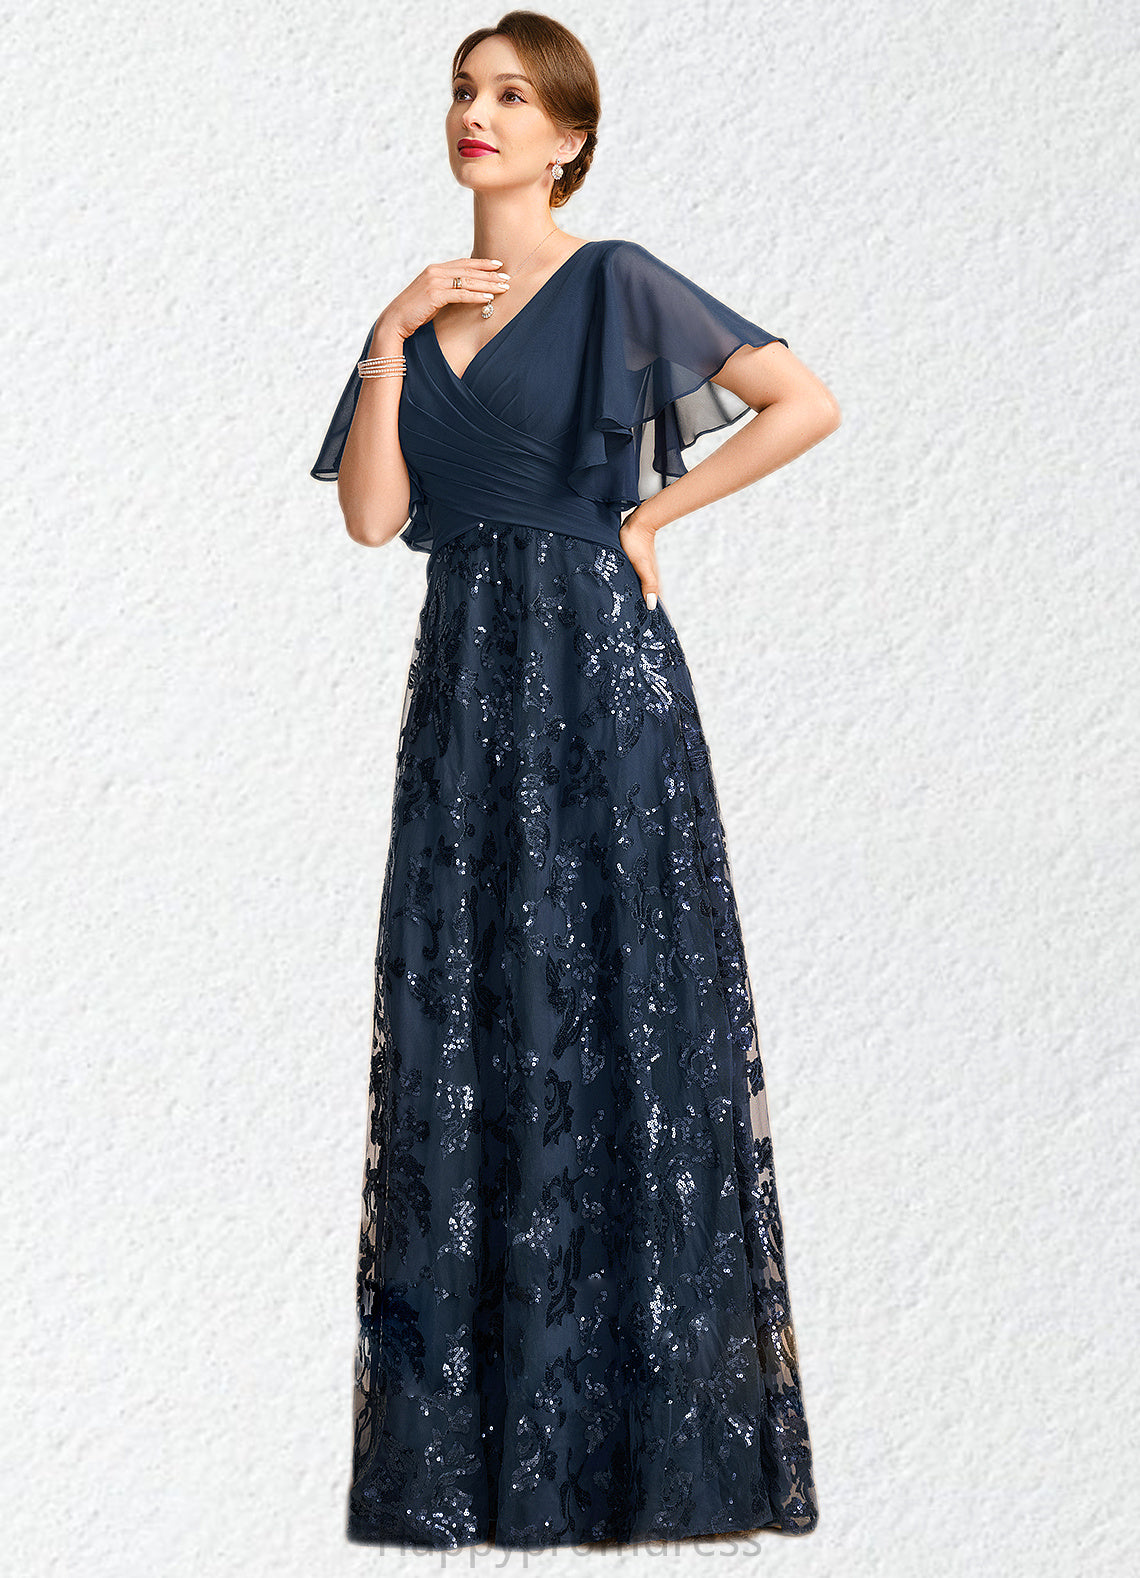 Sydney A-line V-Neck Floor-Length Chiffon Lace Sequin Mother of the Bride Dress With Pleated XXSP0021648